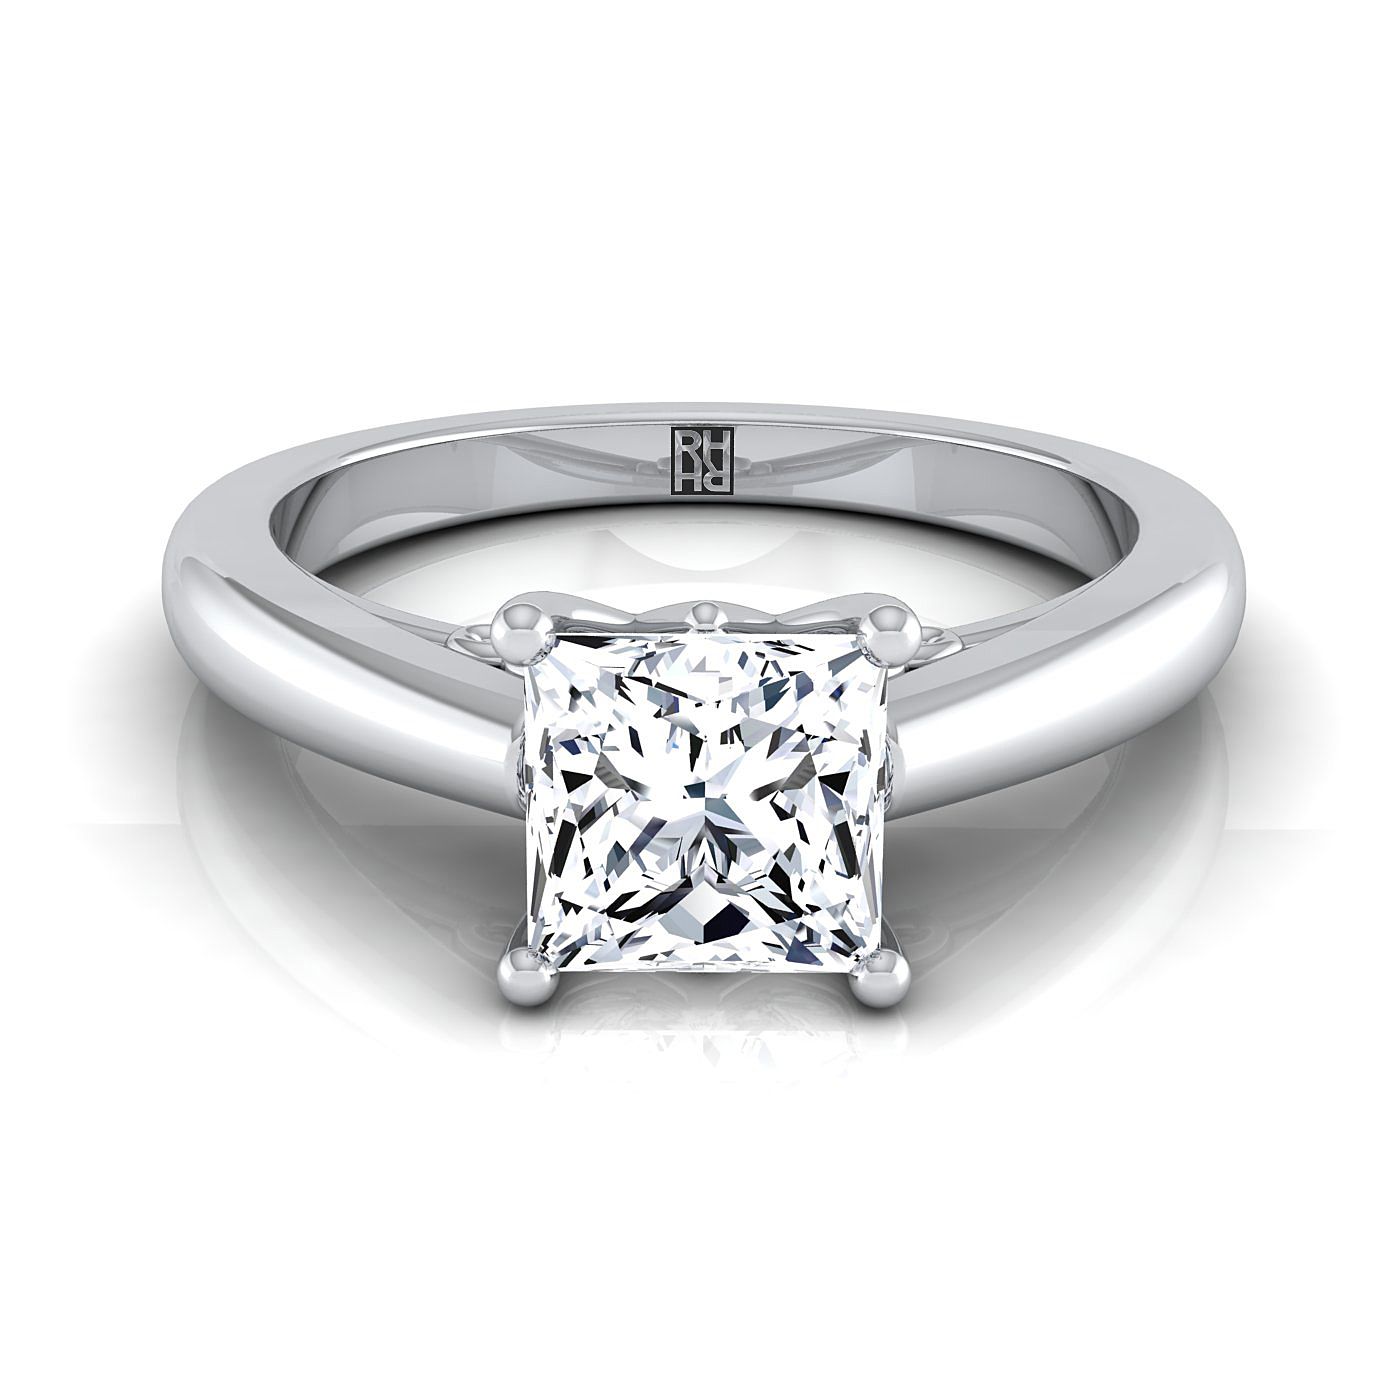 14K White Gold Princess Cut Scroll Gallery Comfort Fit Solitaire Engagement Ring